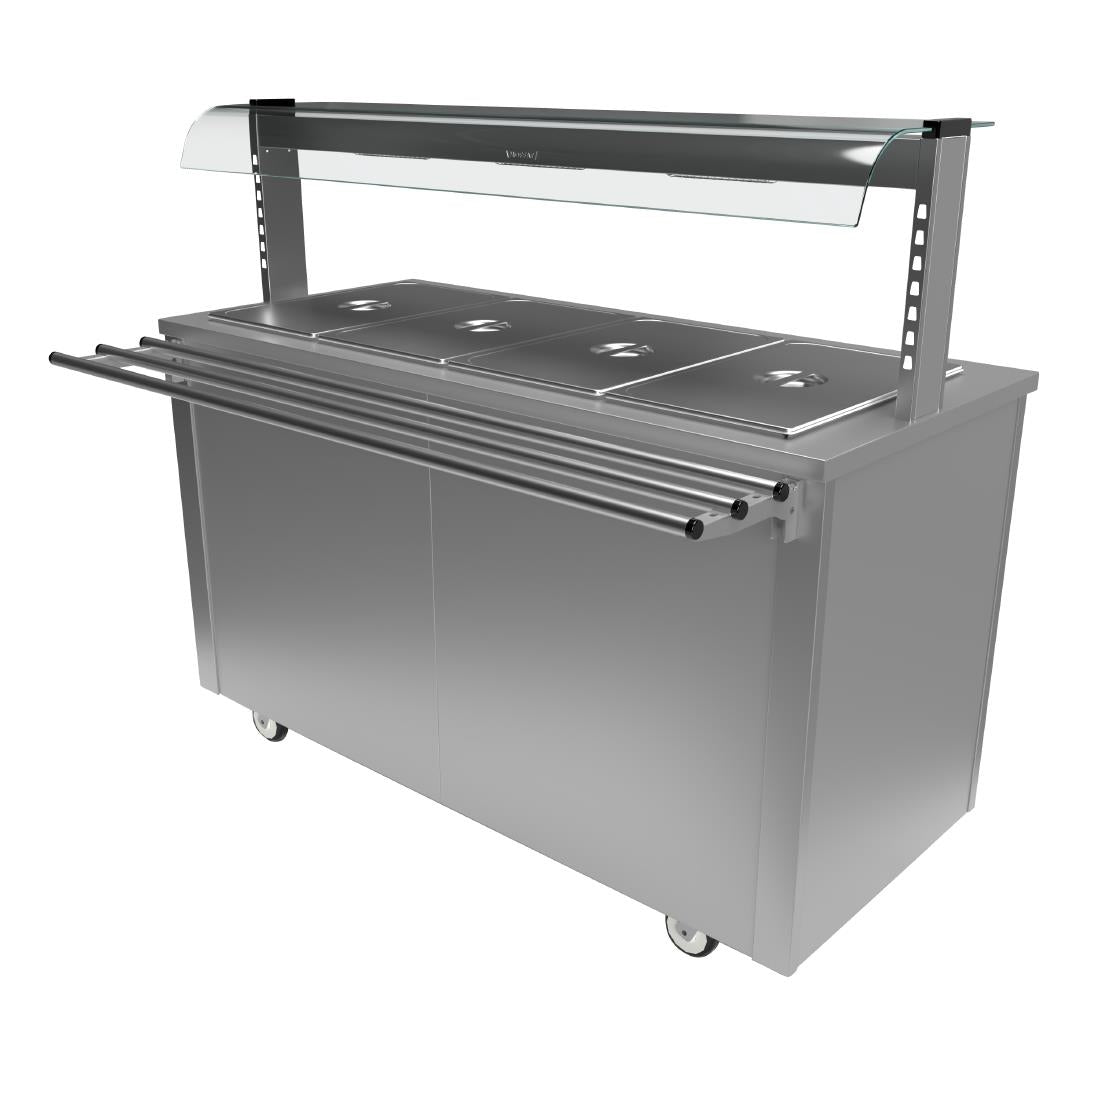 DR409 Moffat Versicarte Plus Hot Food Service Counter With Bain Marie VCBM4 JD Catering Equipment Solutions Ltd